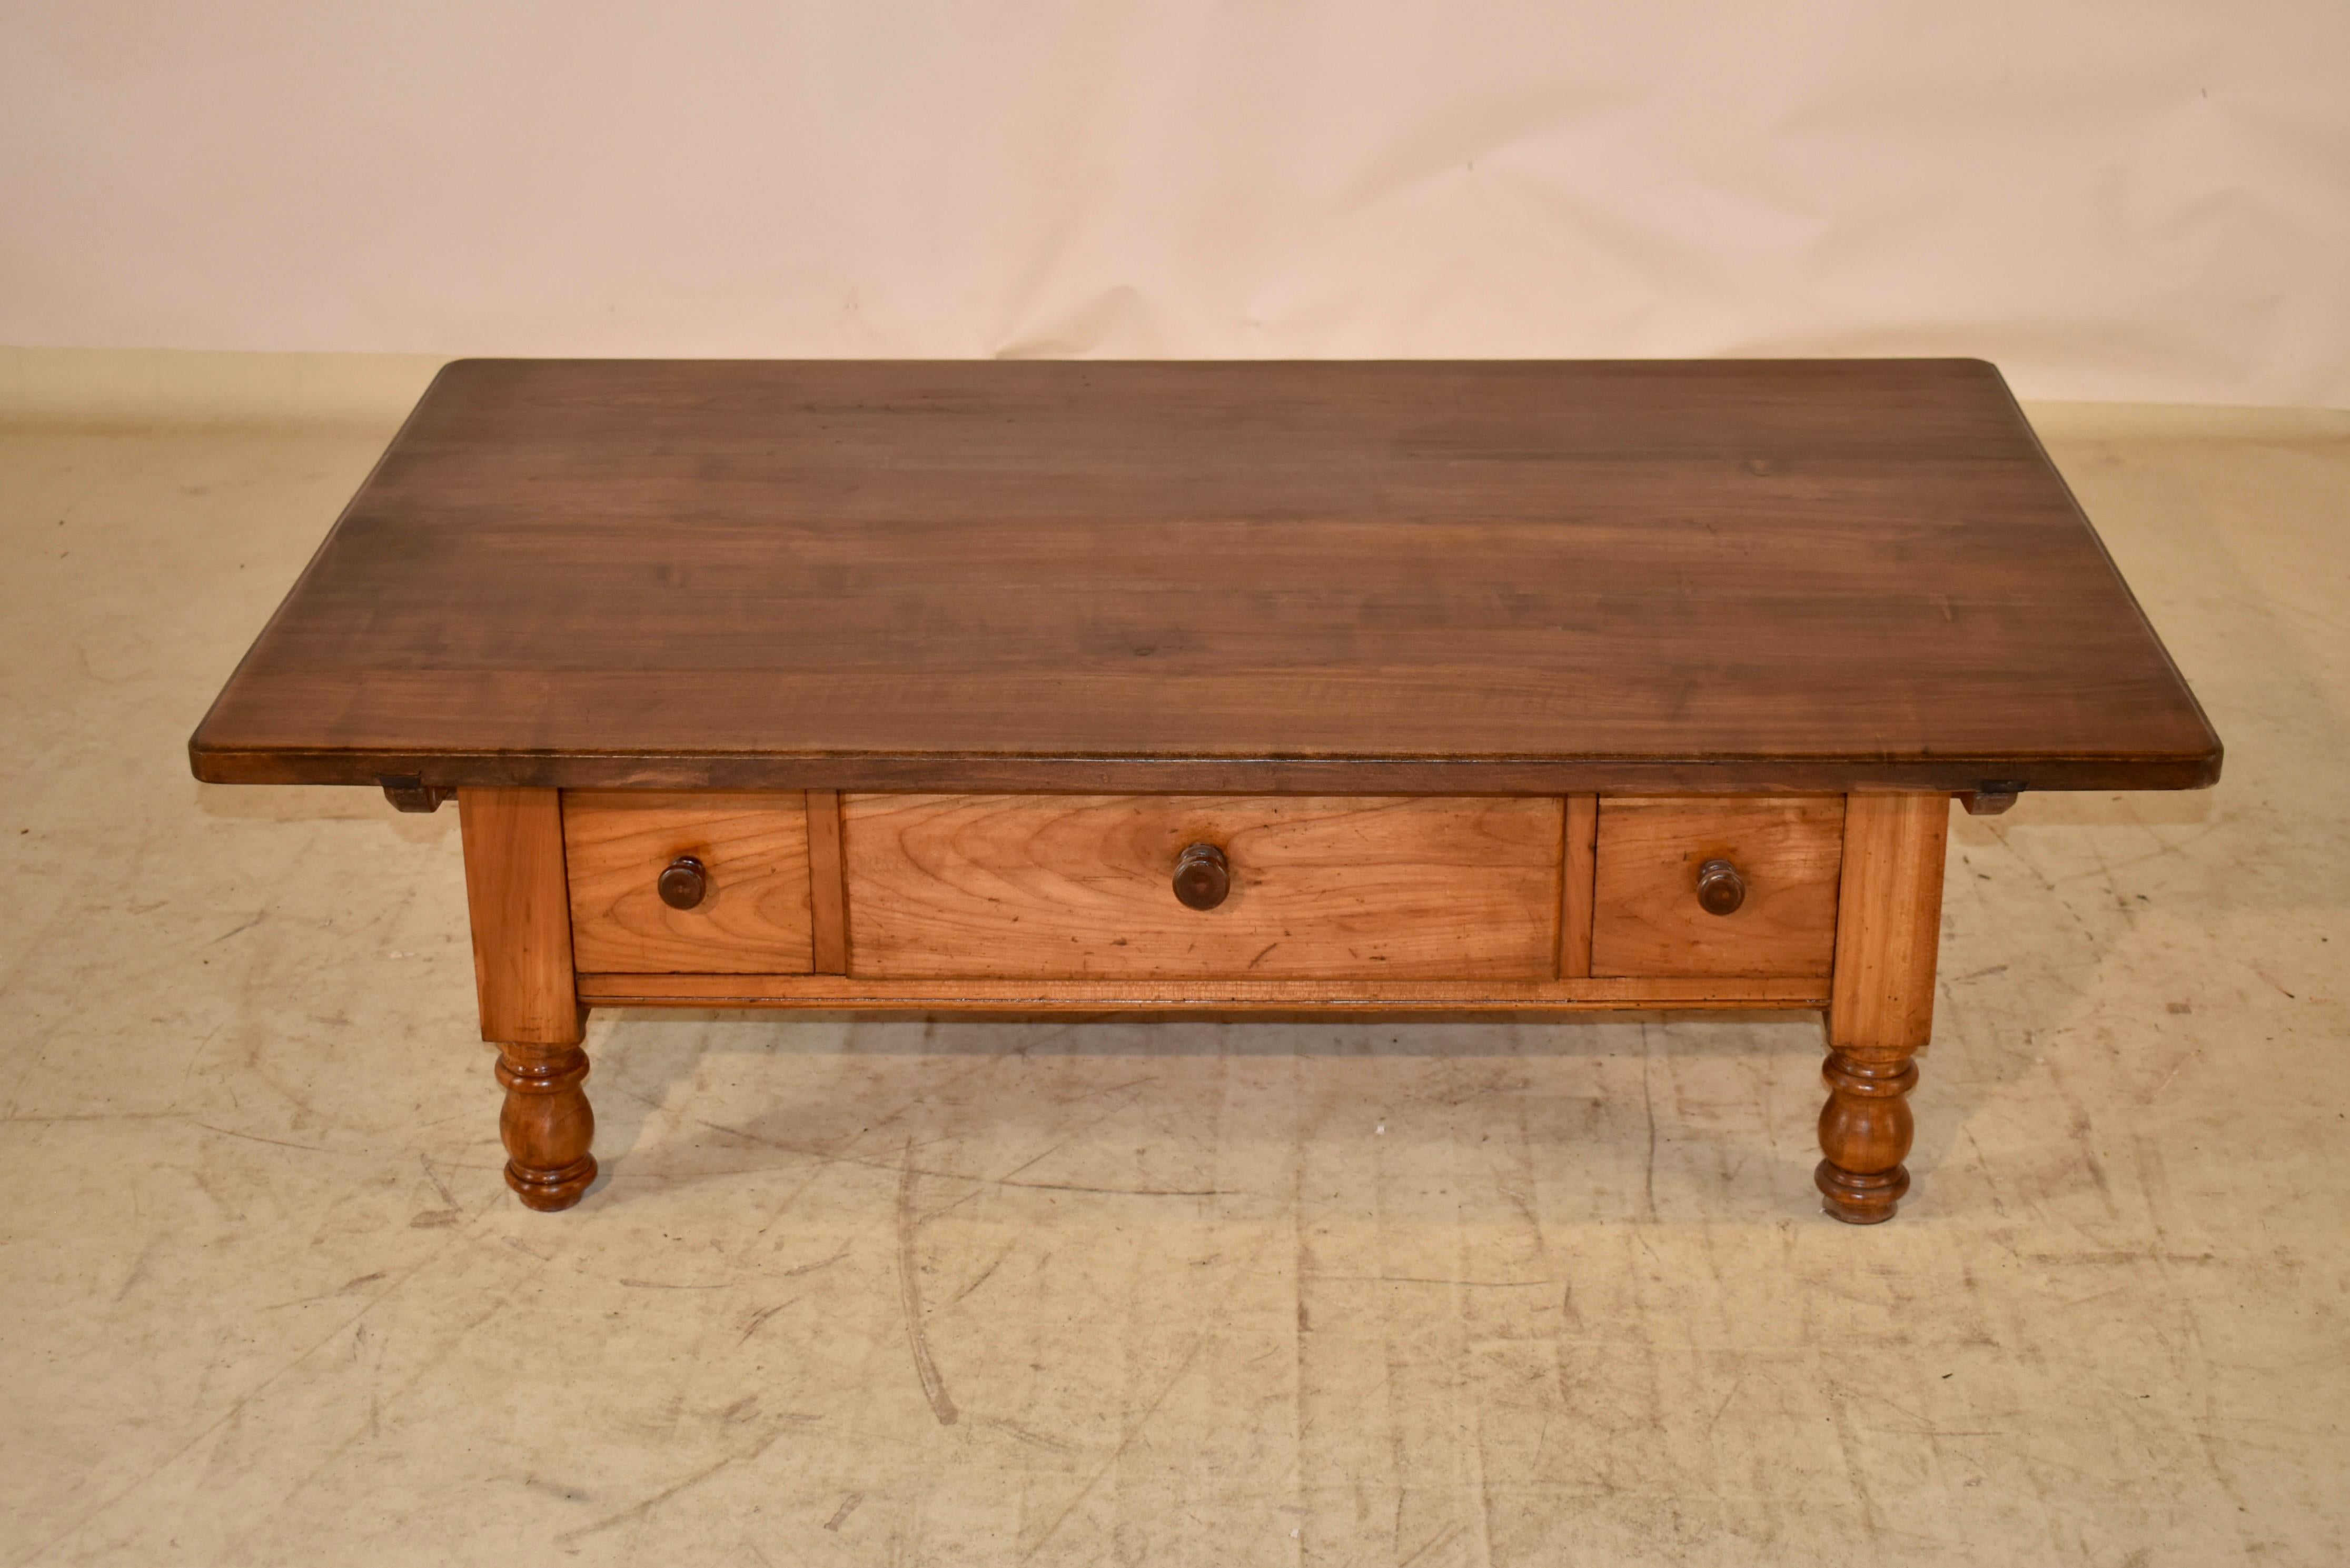 18th Century Swiss Cherry Coffee Table with Three Drawers In Good Condition For Sale In High Point, NC